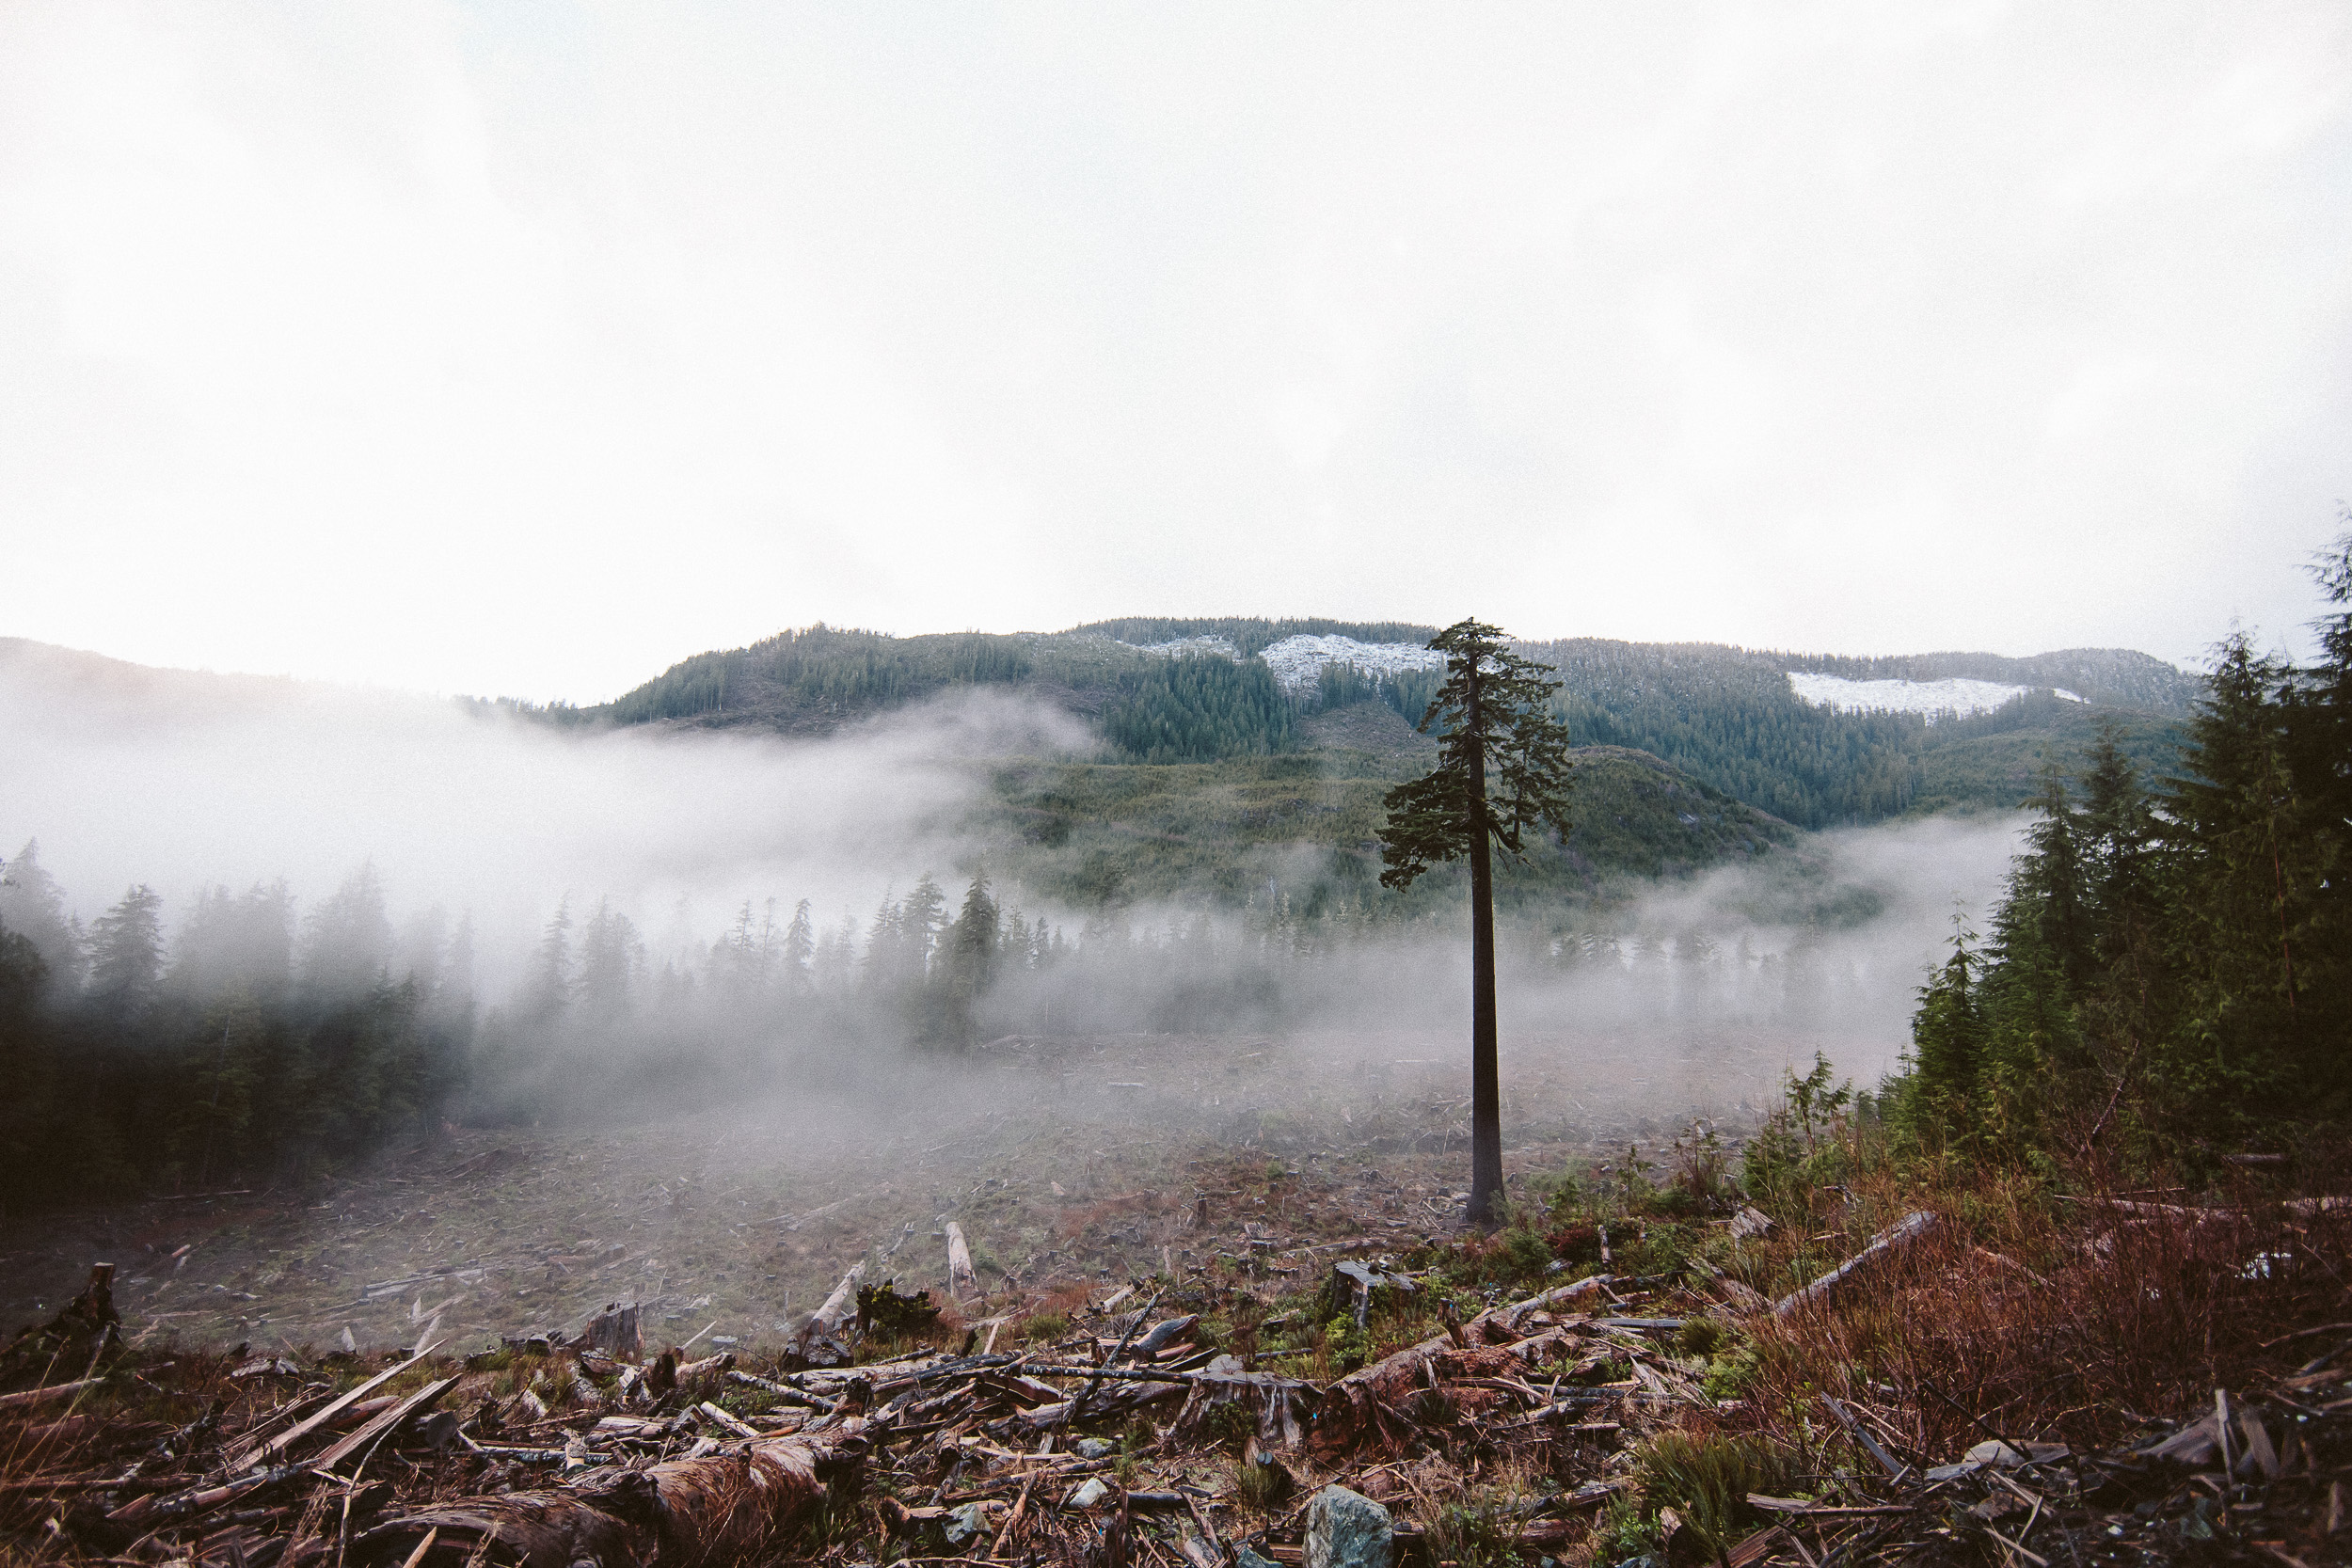 03-Vancouver-Island-BC-Old-Growth-Forests-Logging-Port-Renfrew-Big-Lonely-Doug.jpg